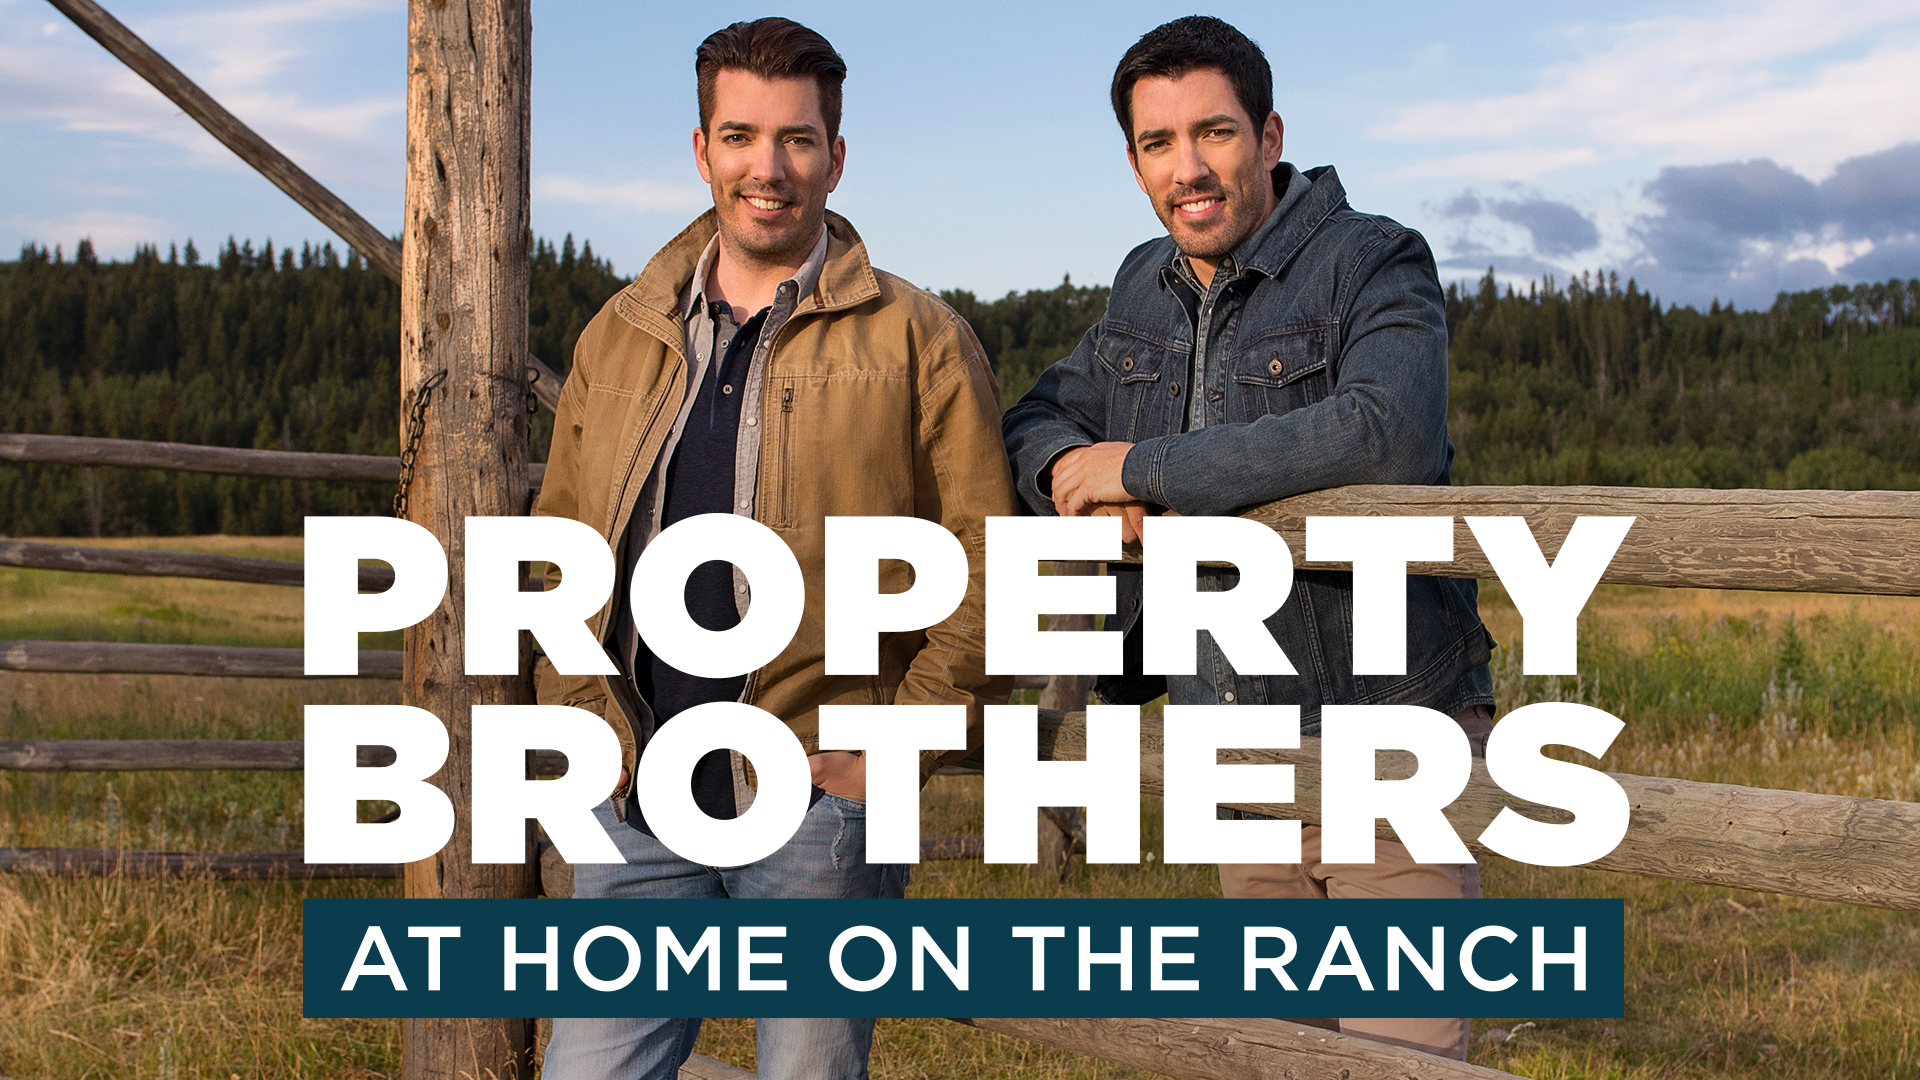 HGTV-showchip-property-brothers-at-home-on-the-ranch